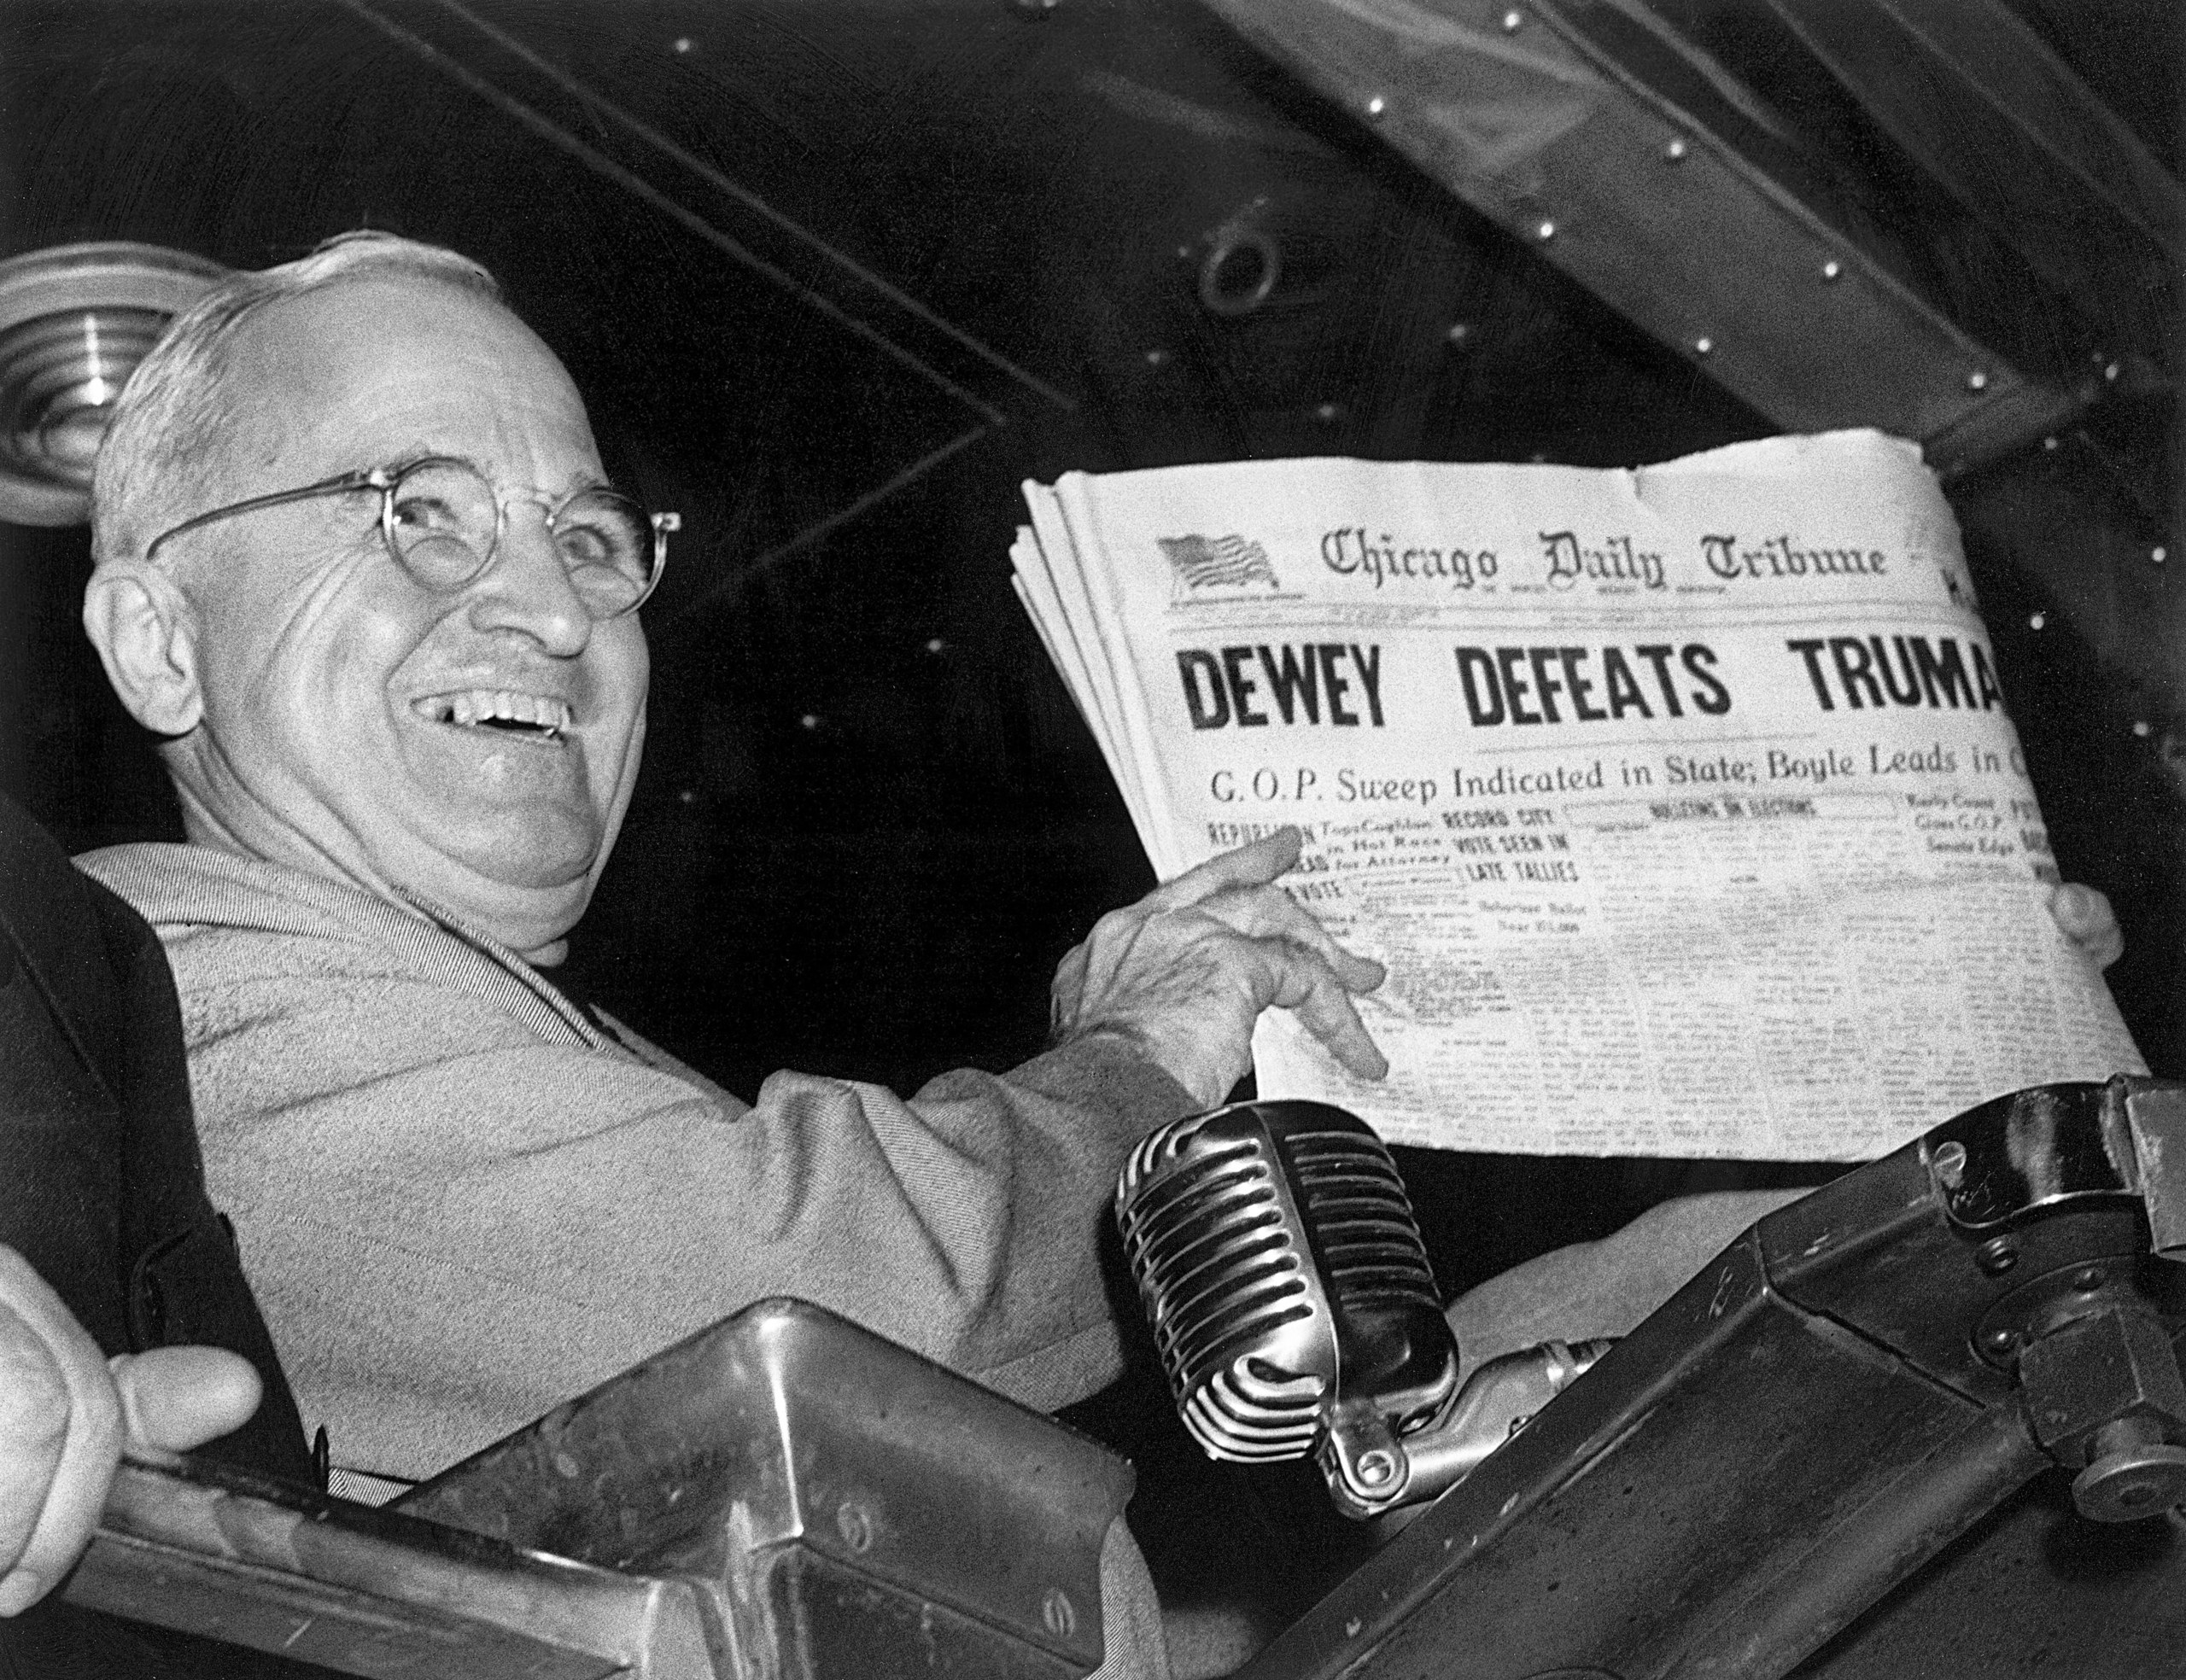 Harry S. Truman holding the Chicago Daily Tribune with the erroneous headline, "Dewey Defeats Truman" after winning the 1948 United States presidential election.